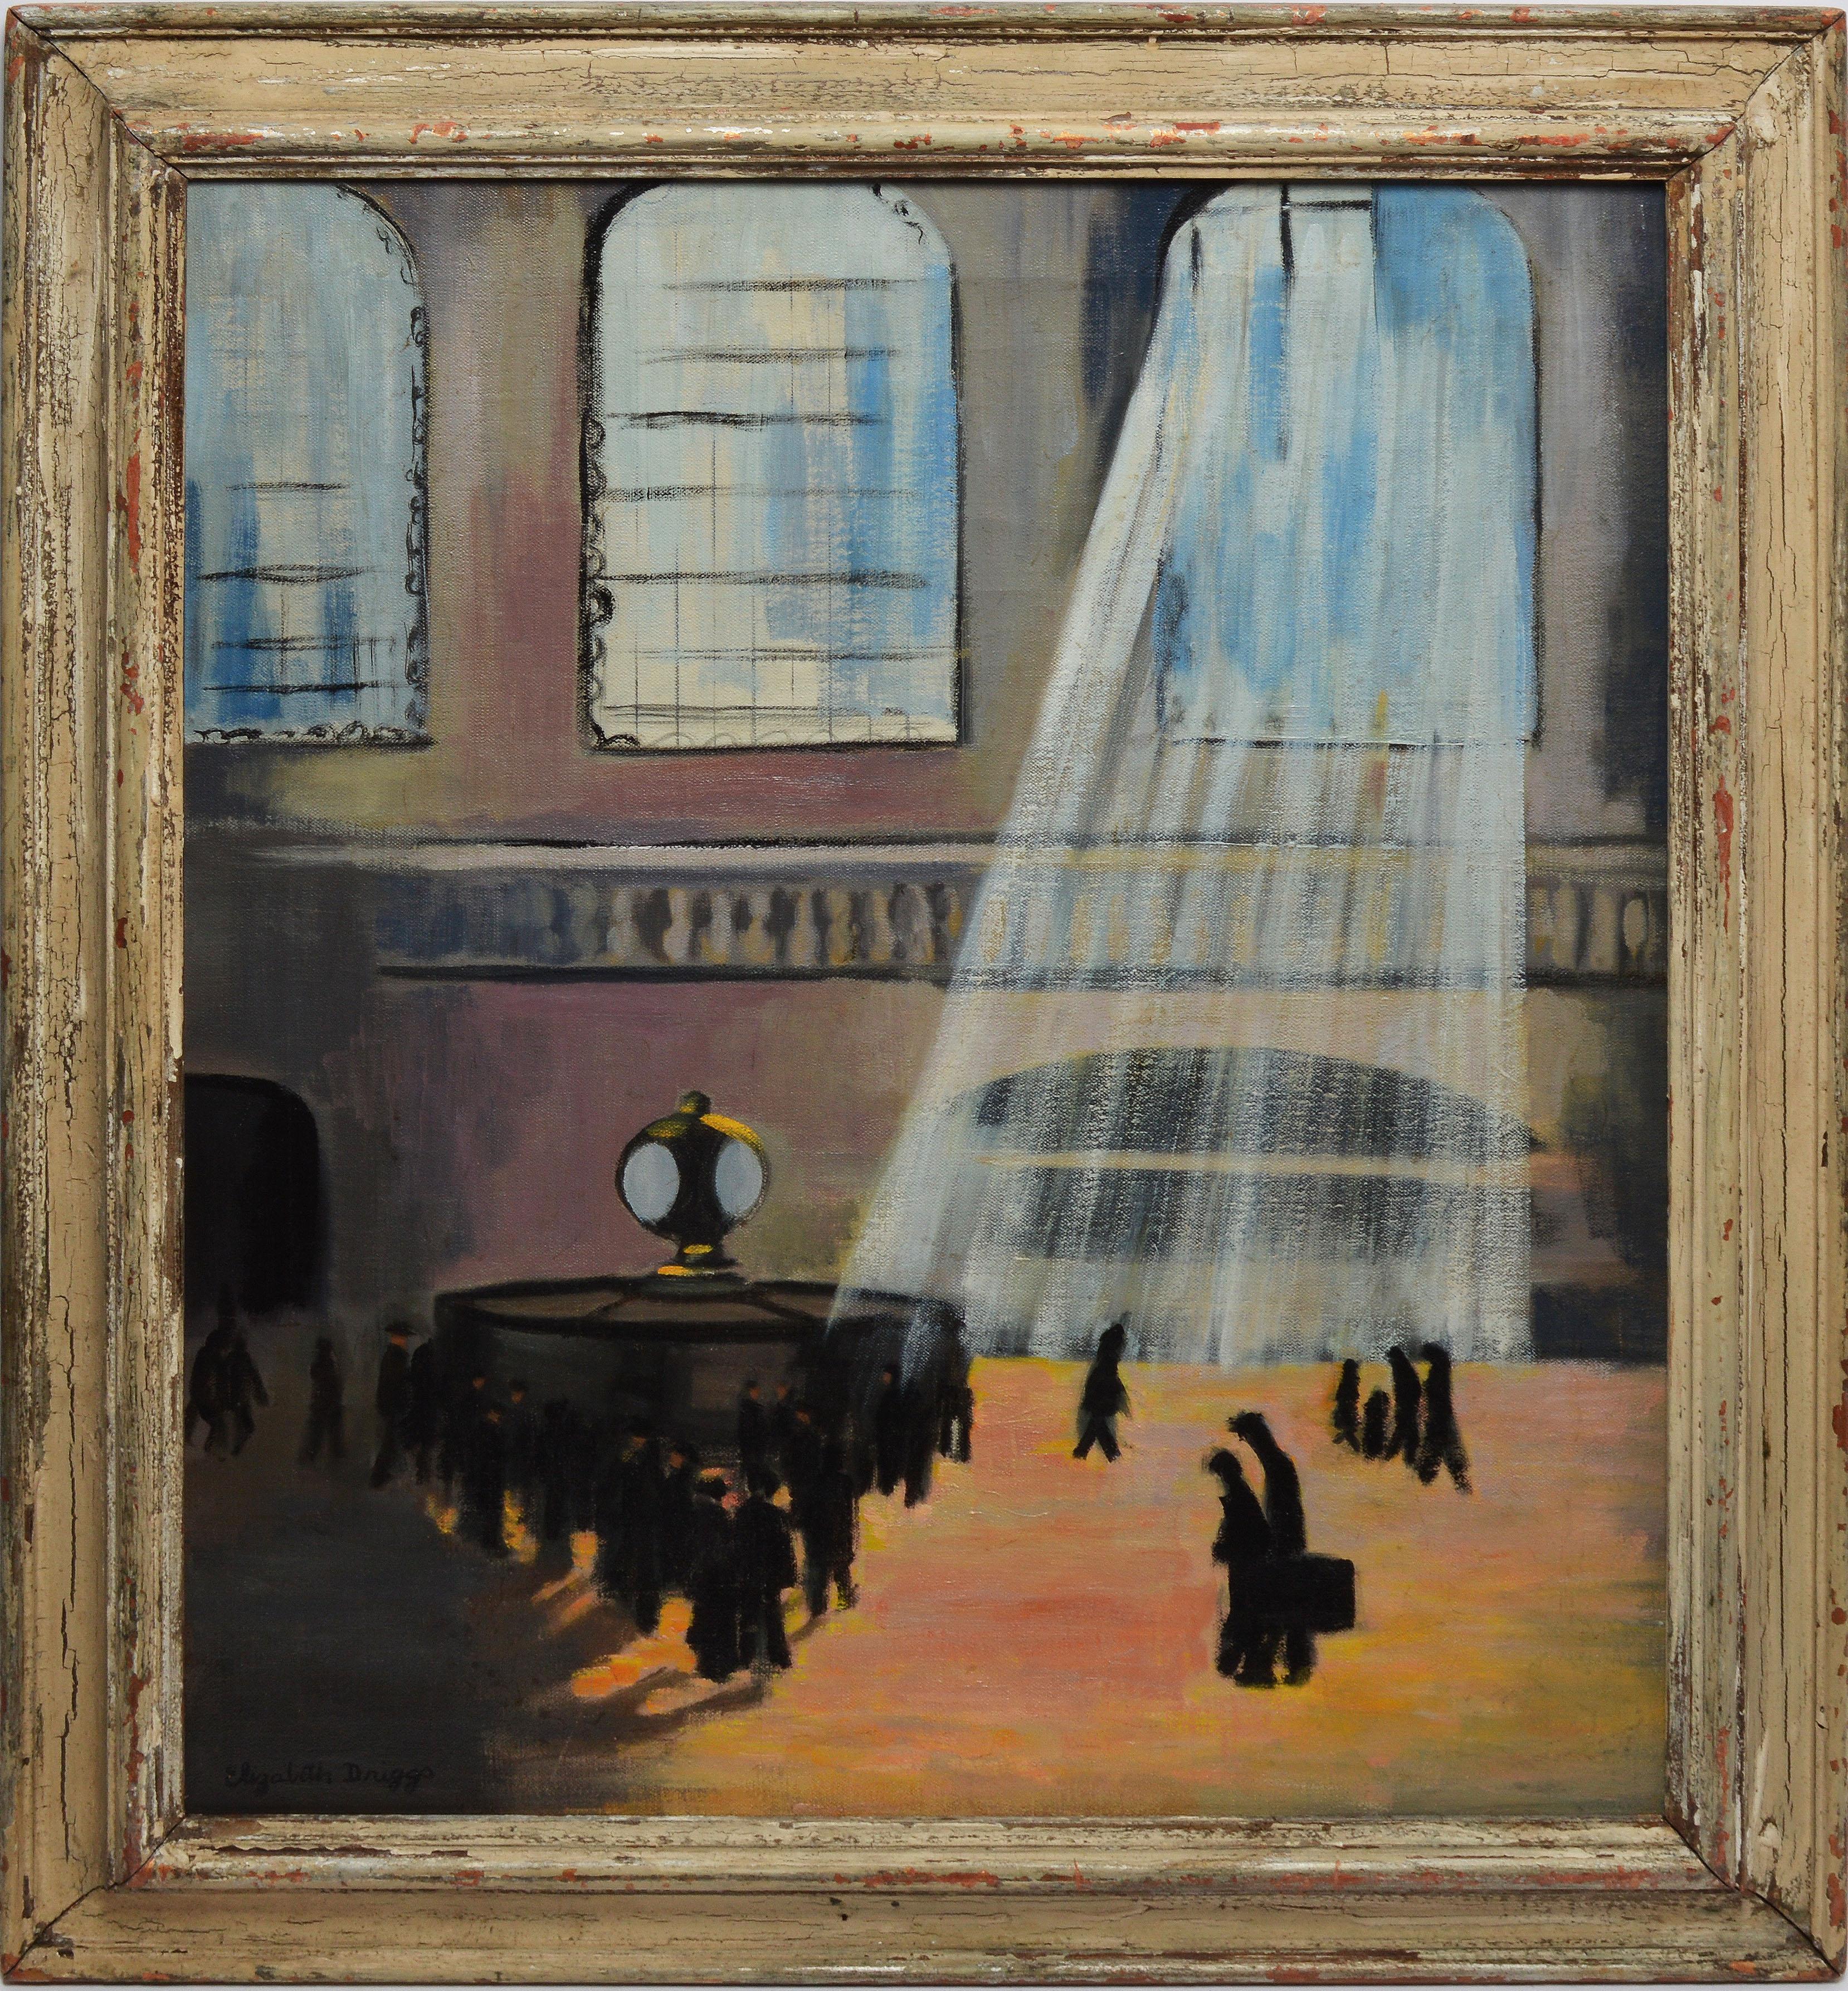 Antique American modernist oil painting of Grand Central Terminal in New York City..  Oil on canvas, circa 1930.  Signed lower left.  Displayed in a period modernist frame.  Image size, 24"L x 28"H, overall 20"L x 24"H.